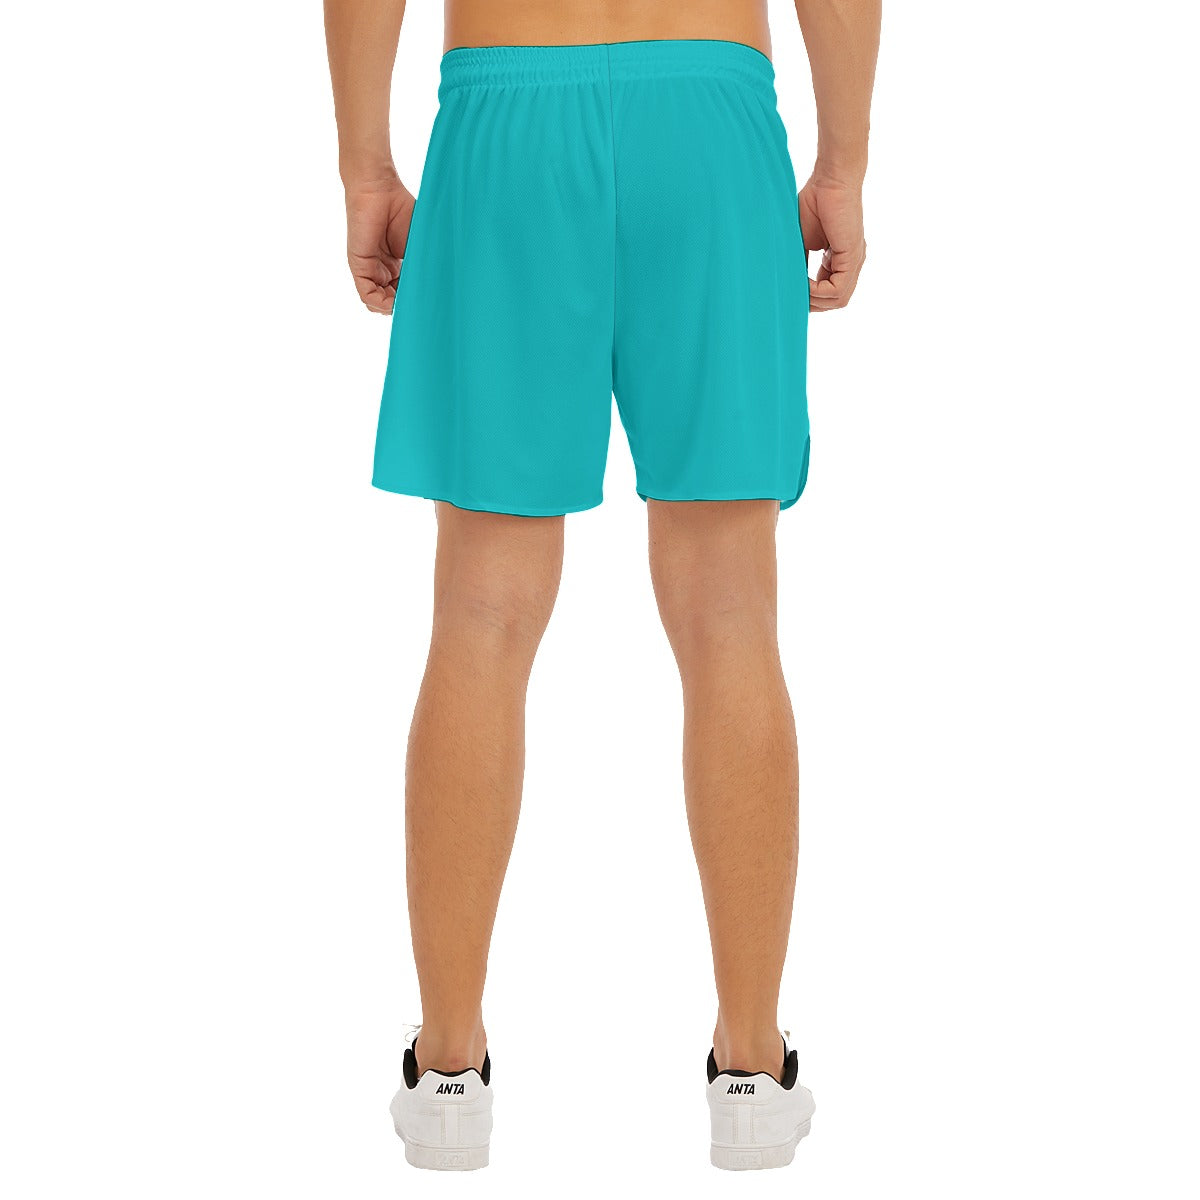 Dizzy Pickle DZY P Classic Men's Side Split Pickleball Court Shorts with Pockets Cool Teal